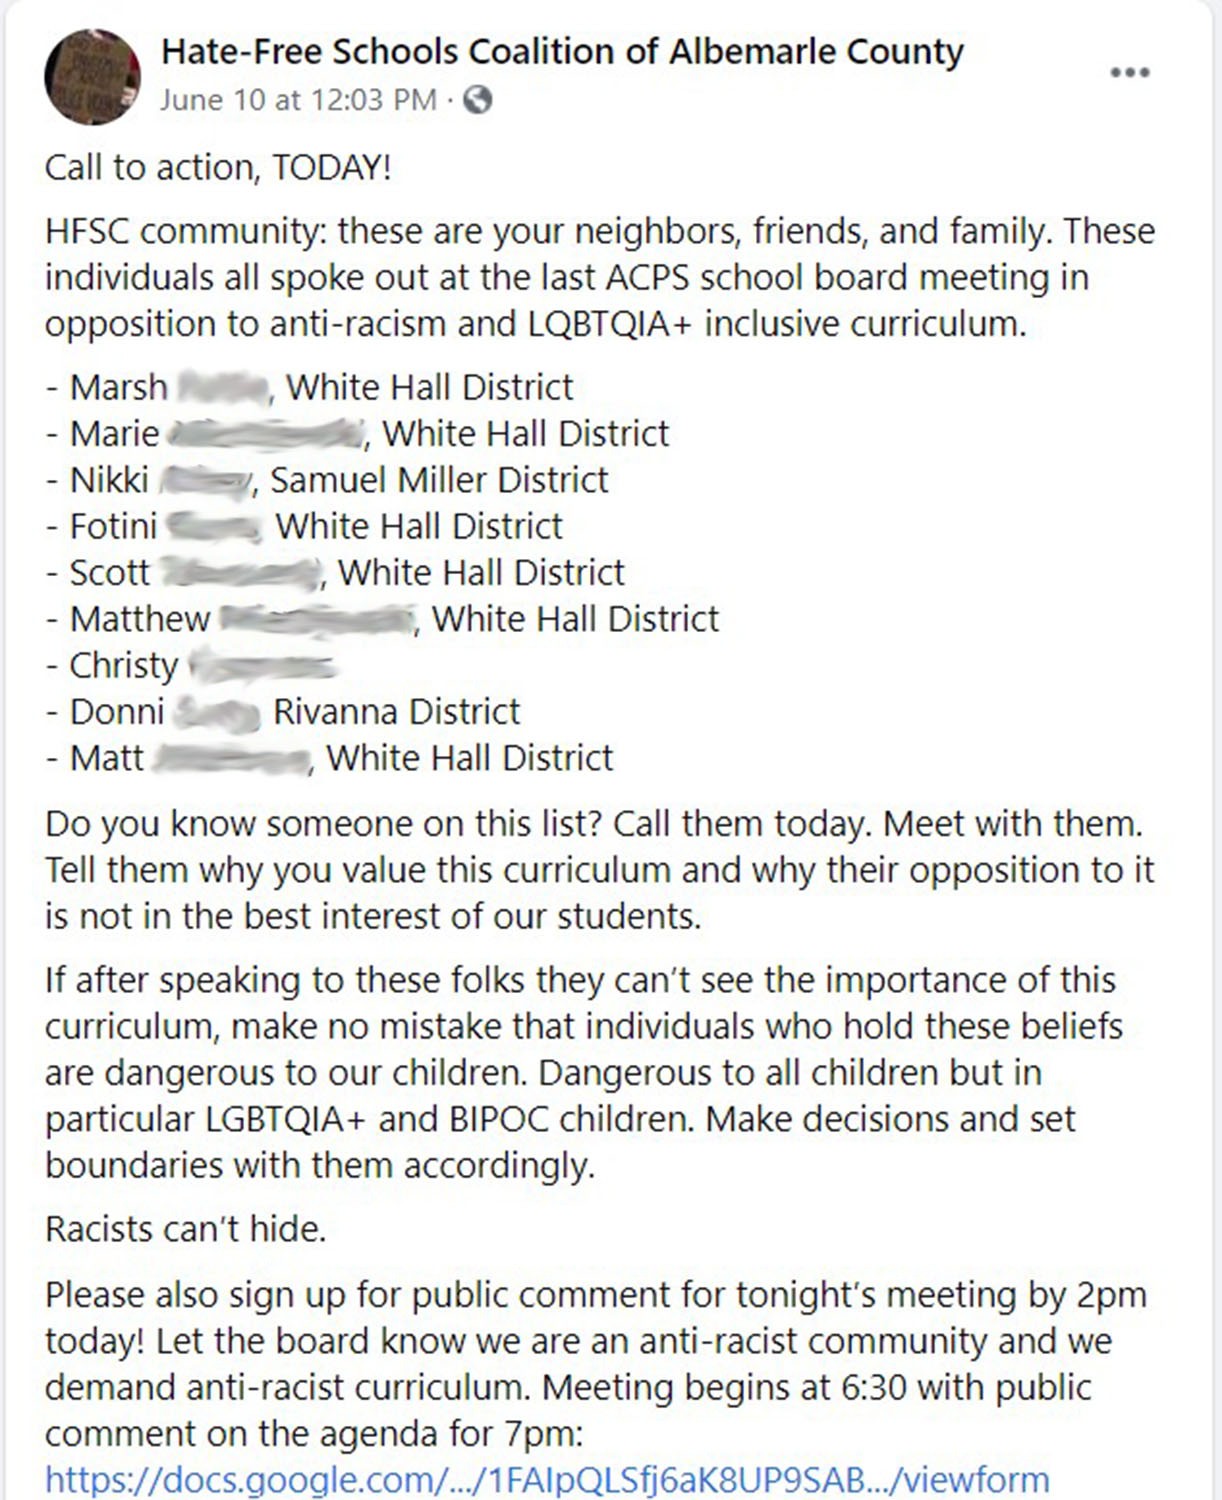 Screenshot. Facebook post of Hate-Free Schools Coalition of Albemarle County calling on its supporters to confront specific persons who spoke against CRT. [Blur added].